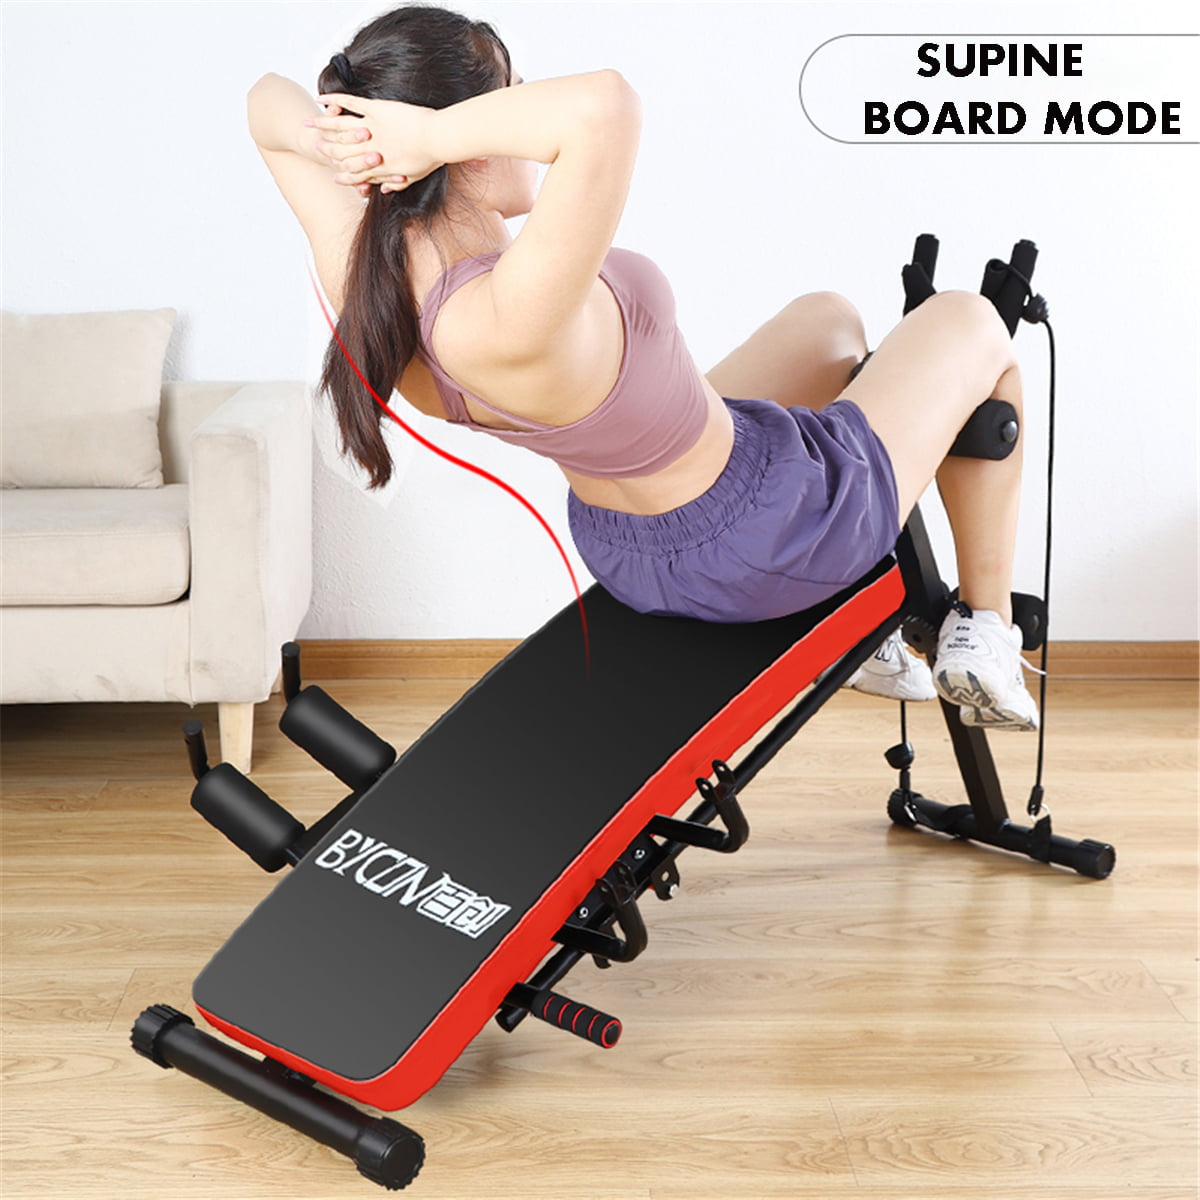 Foldable Sit Up Bench,Foldable Decline Sit Up Bench Crunch Board Fitness Home Gym Exercise Sport for Home Gym Ab Exercises Men Women New Version 2021 